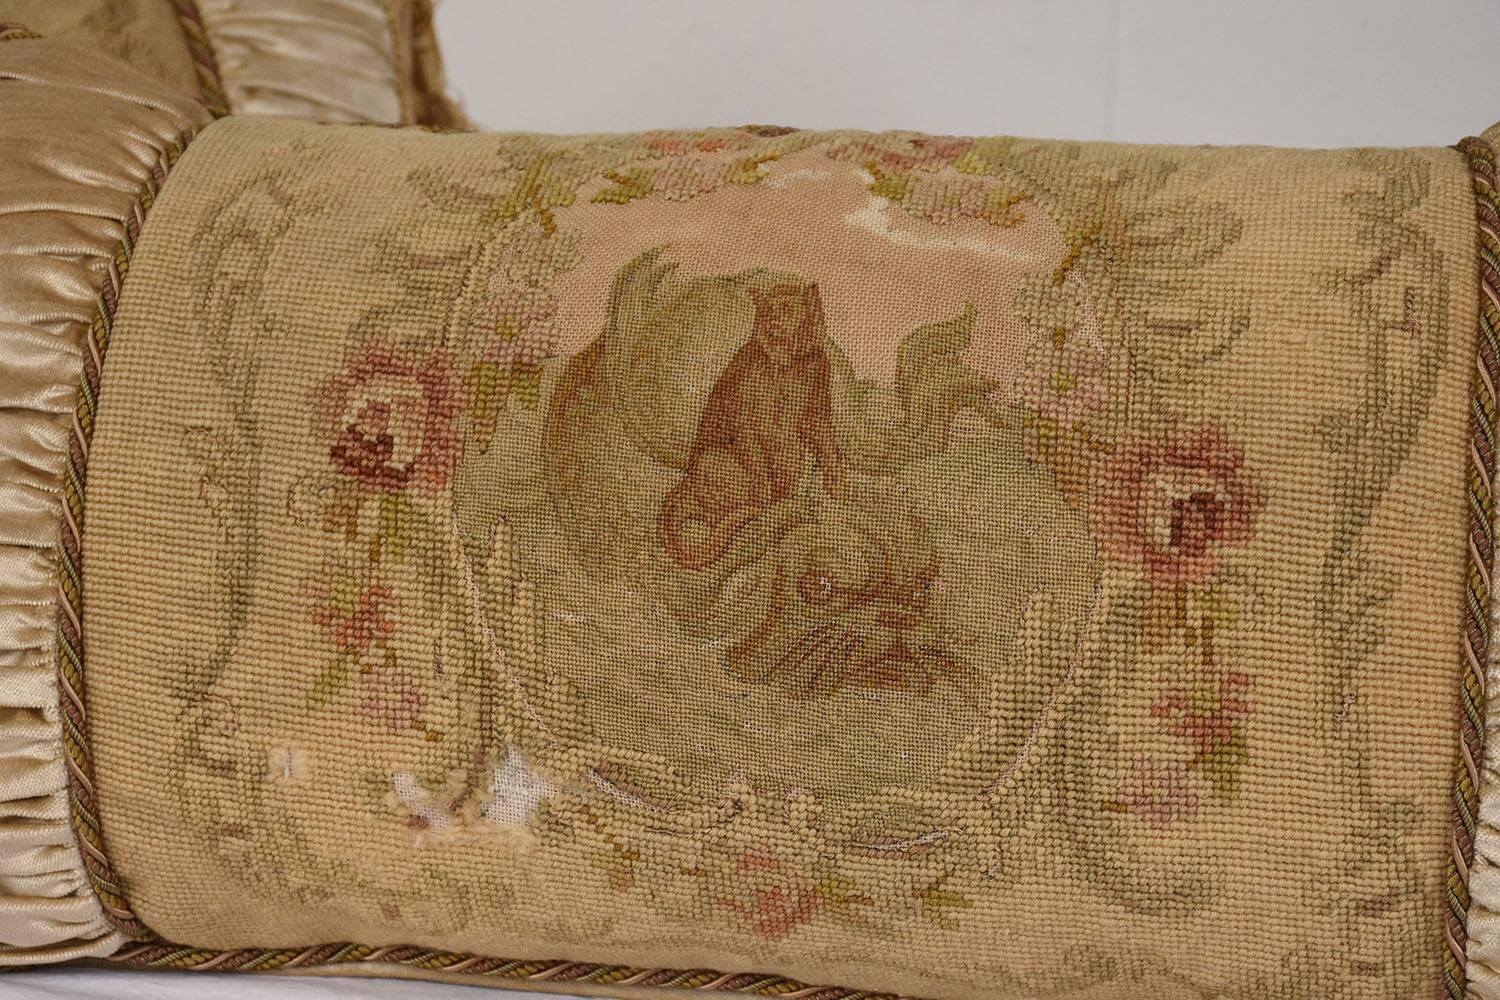 Woven Pair of Aubusson Tapestry Throw Pillows